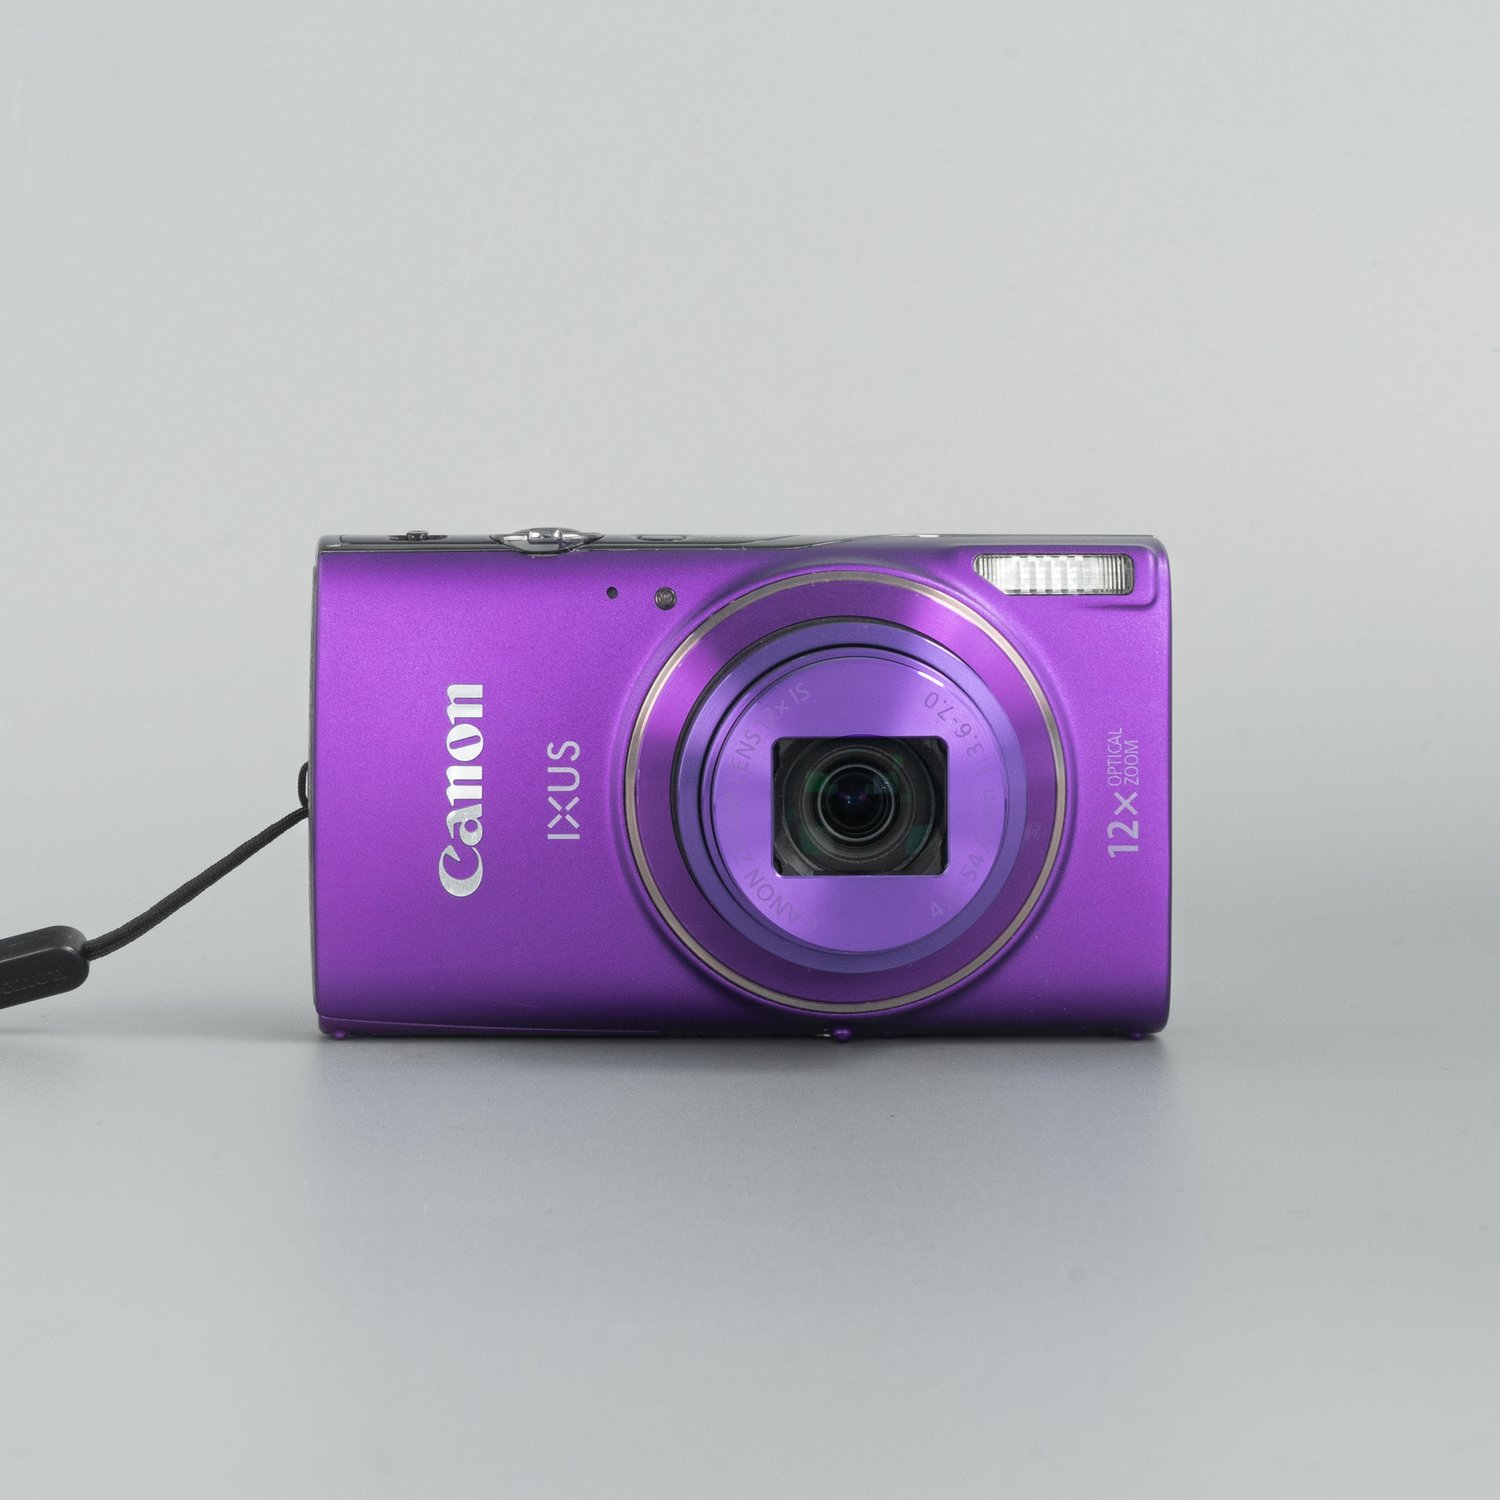 Discover the Versatile Canon IXUS 285 HS A Compact Camera with Powerful Features